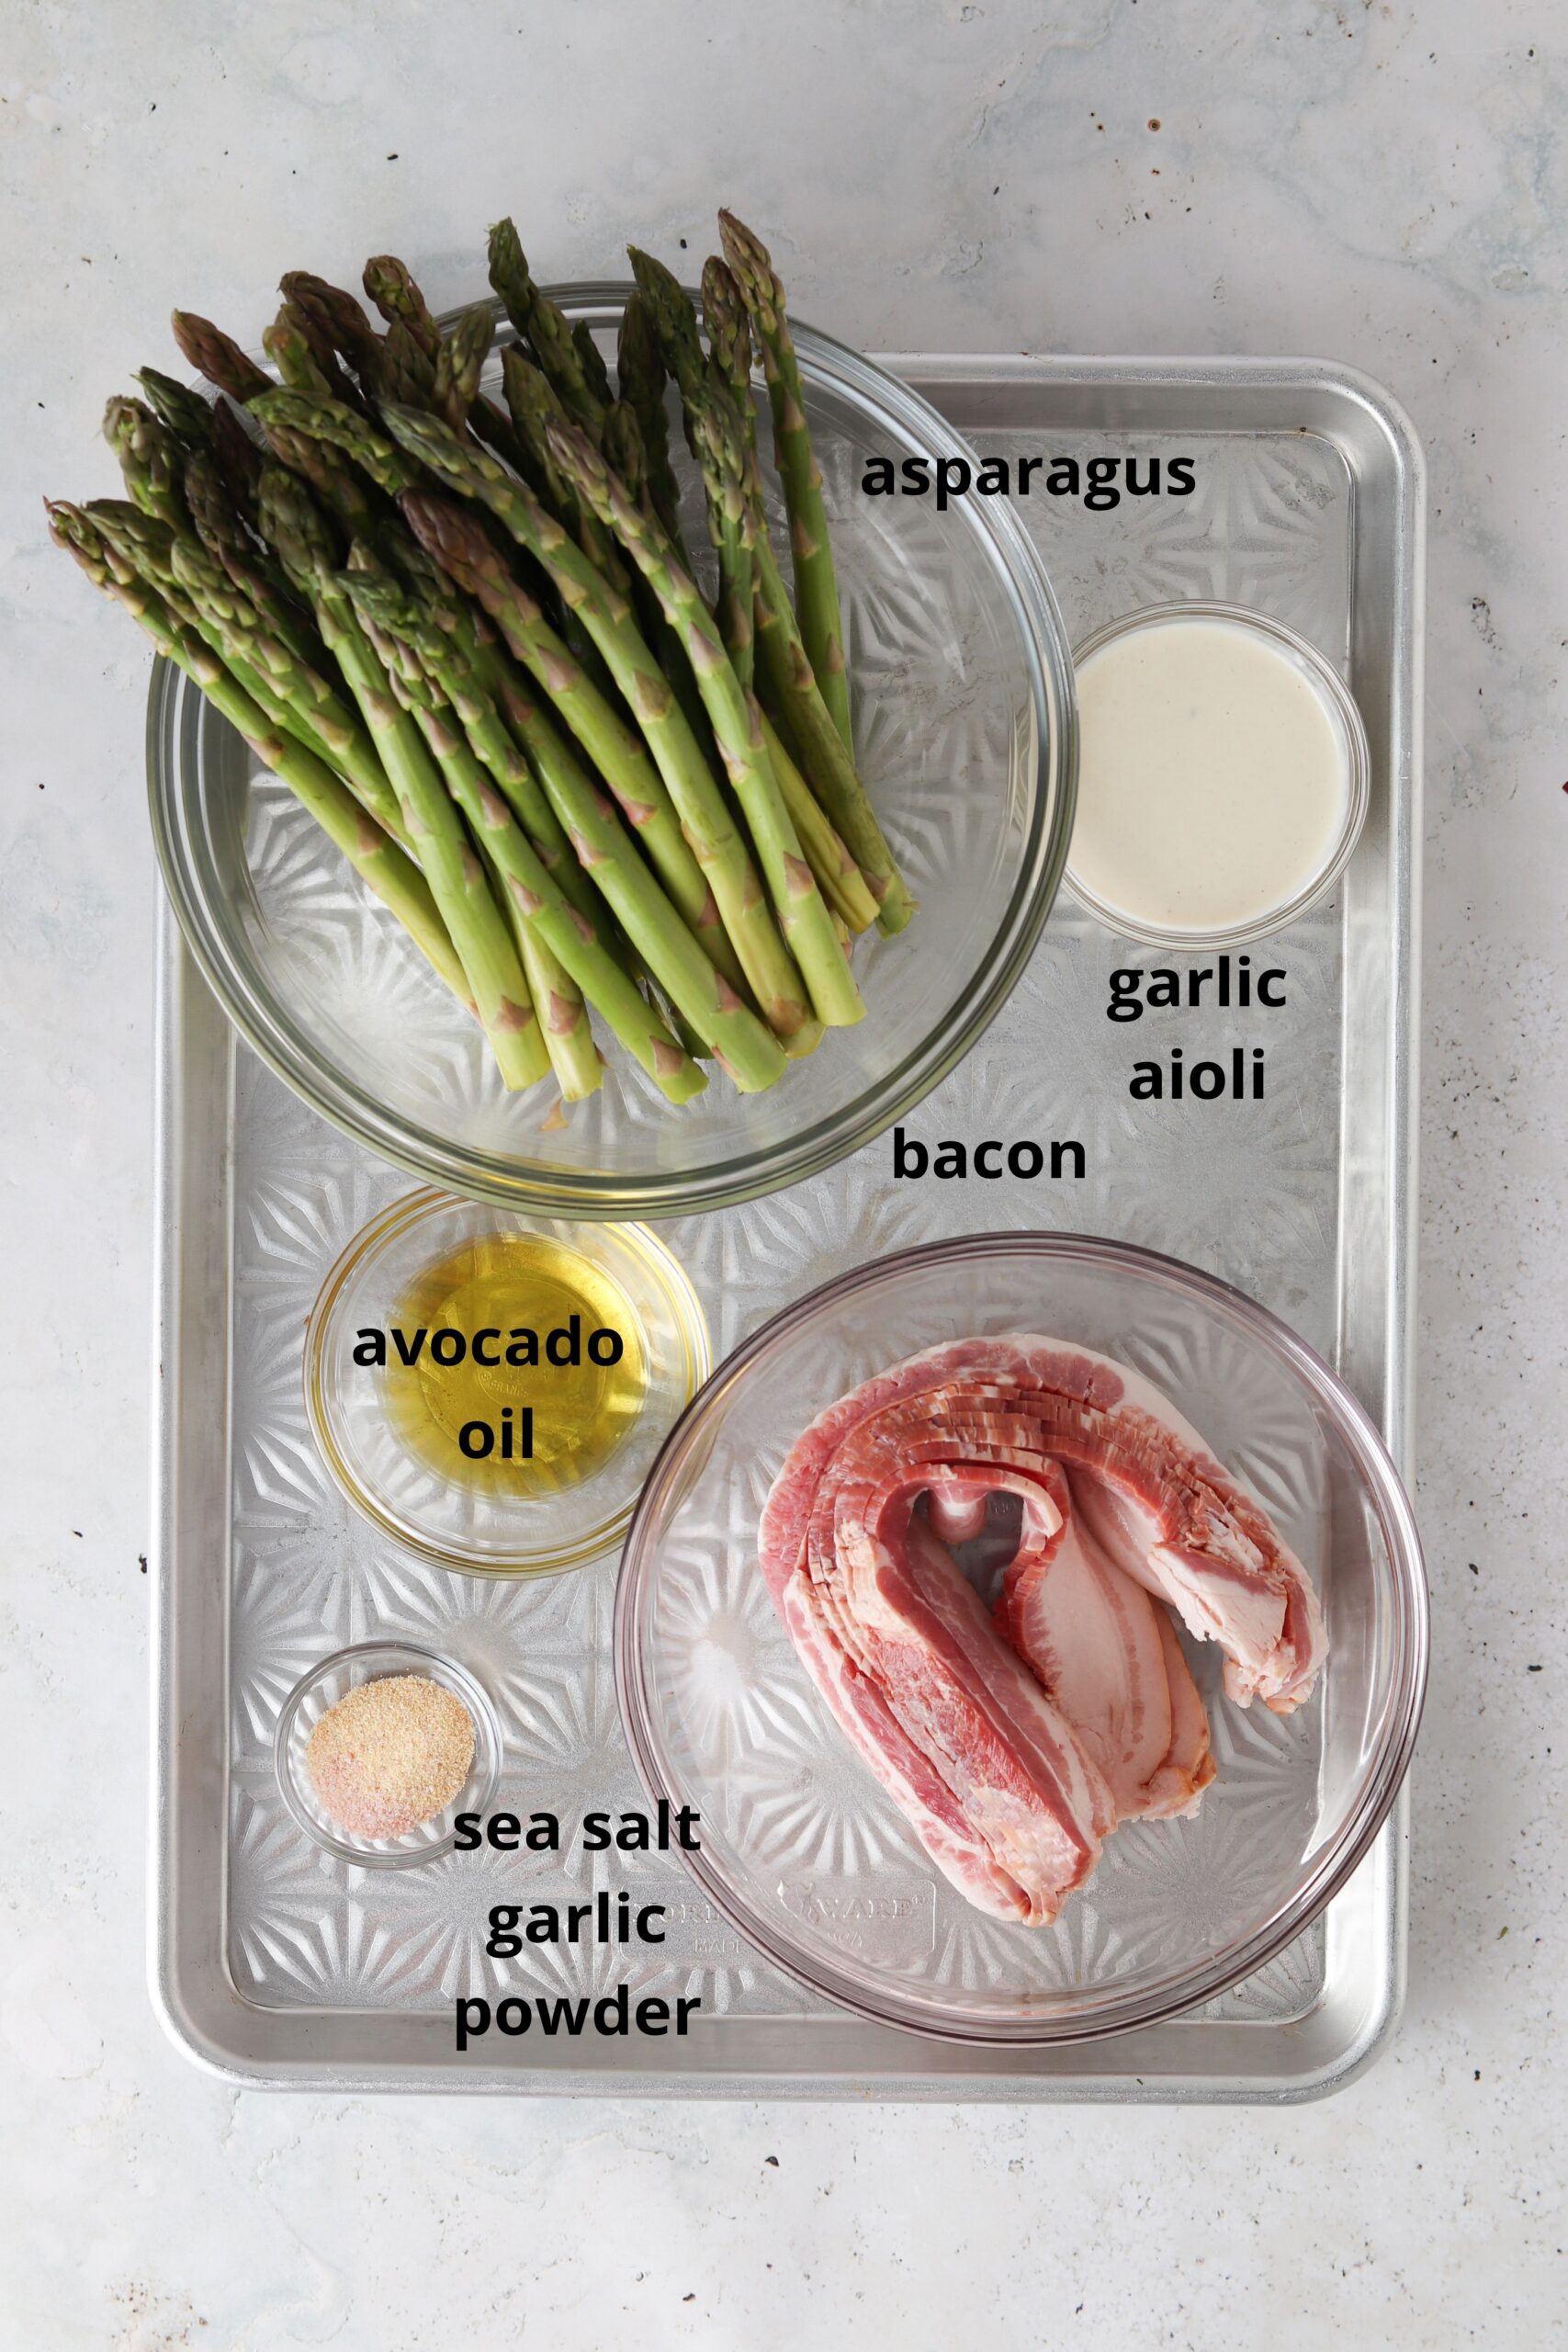 Bacon wrapped asparagus ingredients on a tray in glass bowls.